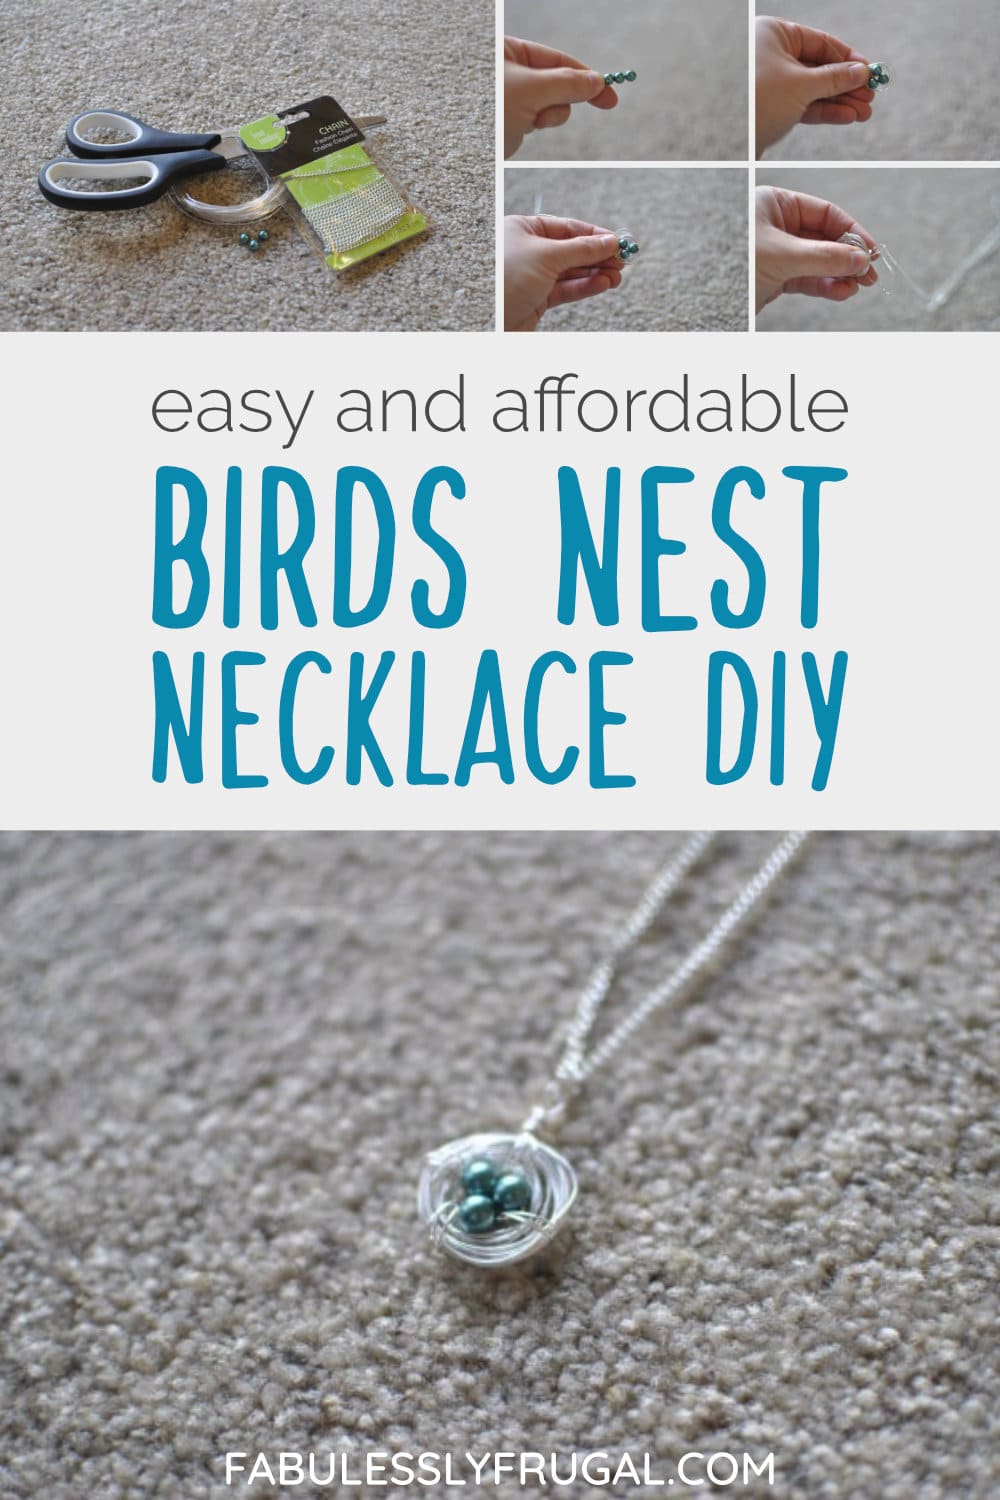 Easy and affordable birds nest necklace diy